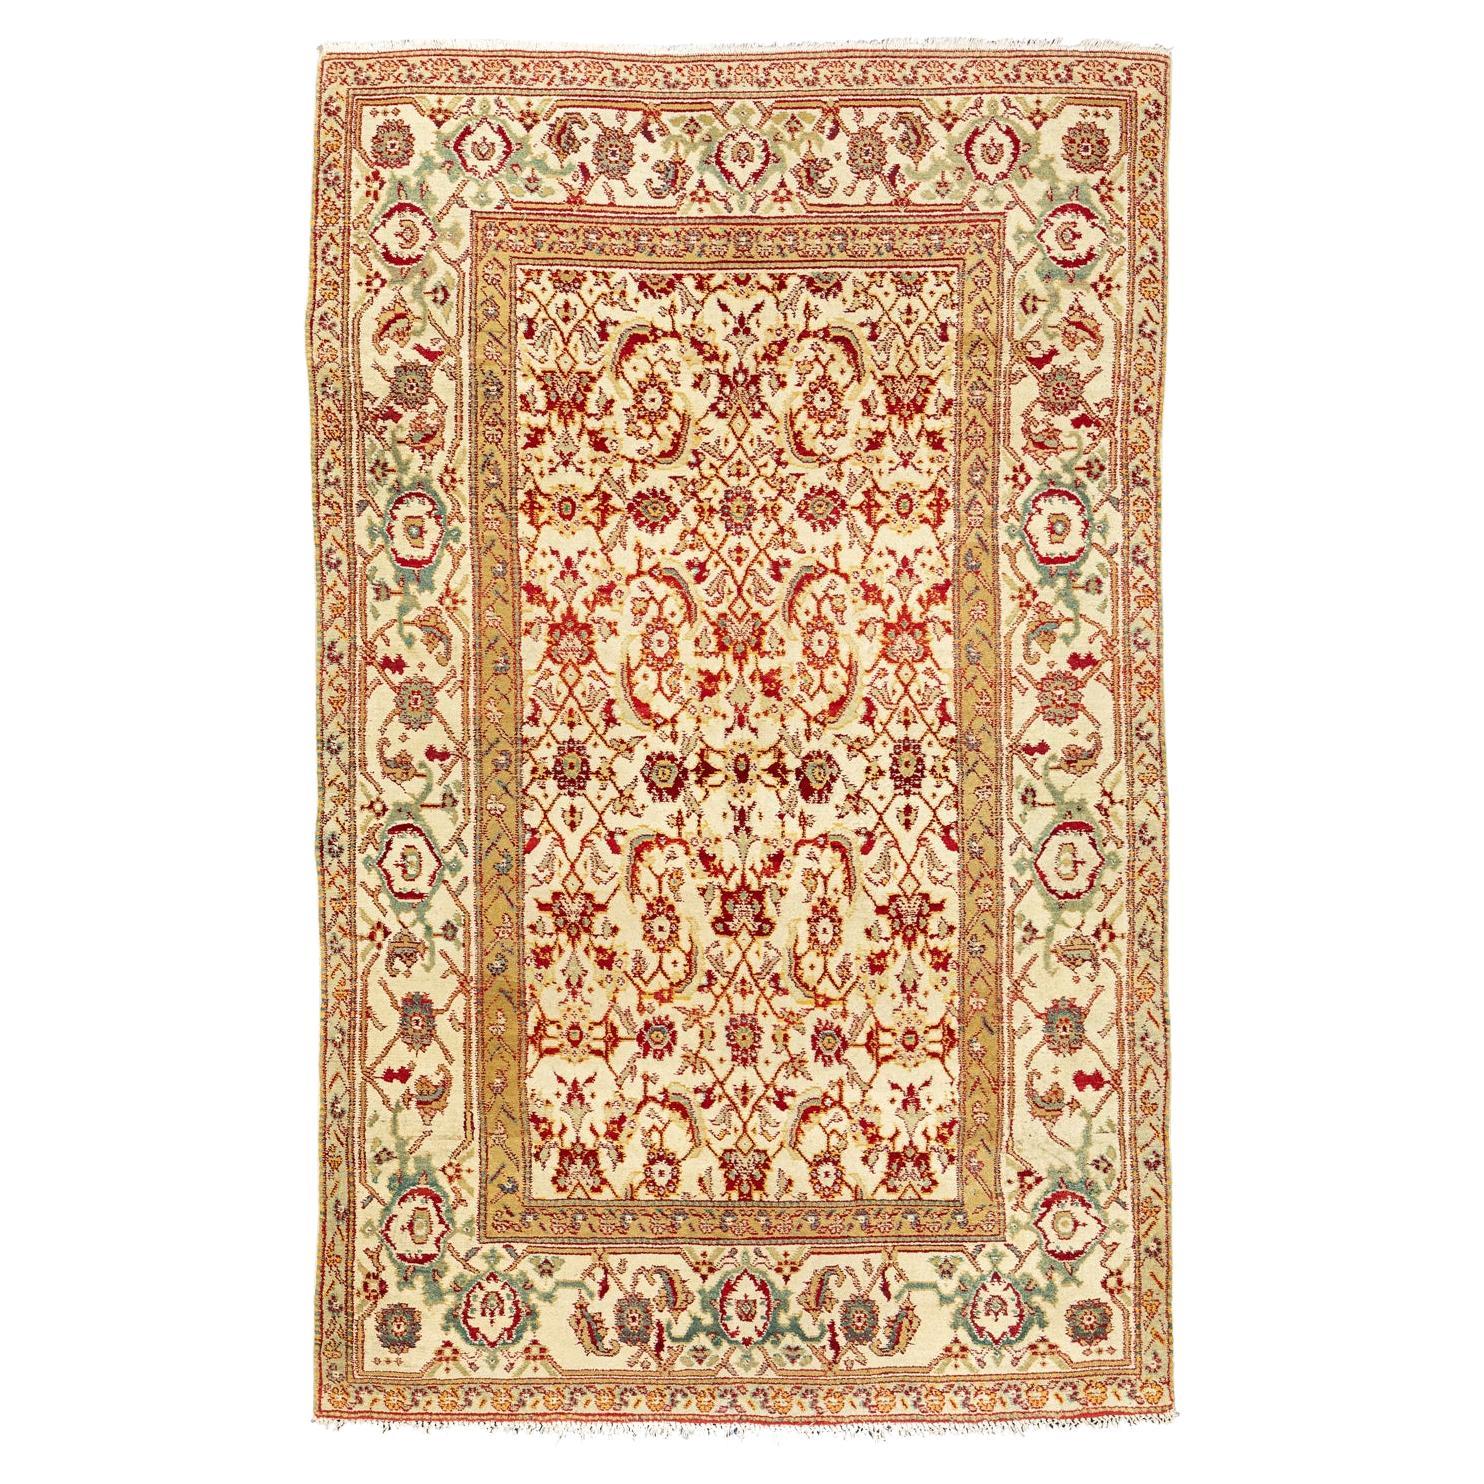 Indian Agra Fish Design Antique Rug Ivory Field Floral All-over